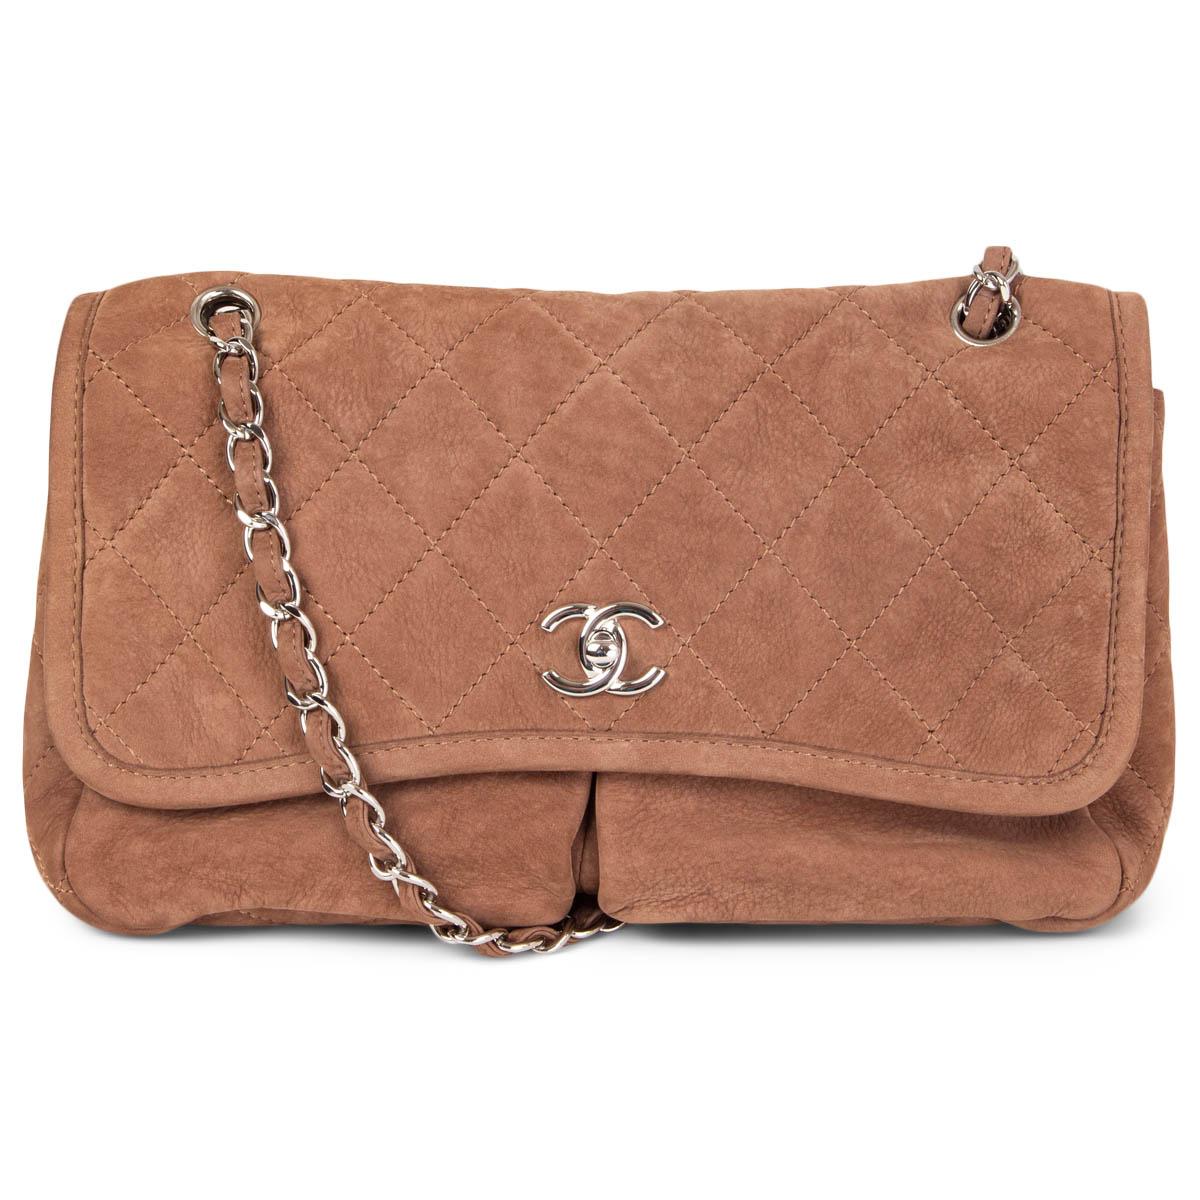 100% authentic Chanel Natural Beauty Medium Flap Bag in light brown quilted nubuck leather featuring silver-tone hardware and an open pocket at the back. Opens with a classic CC turn-lock and is lined in off-white canvas with two open front pockets